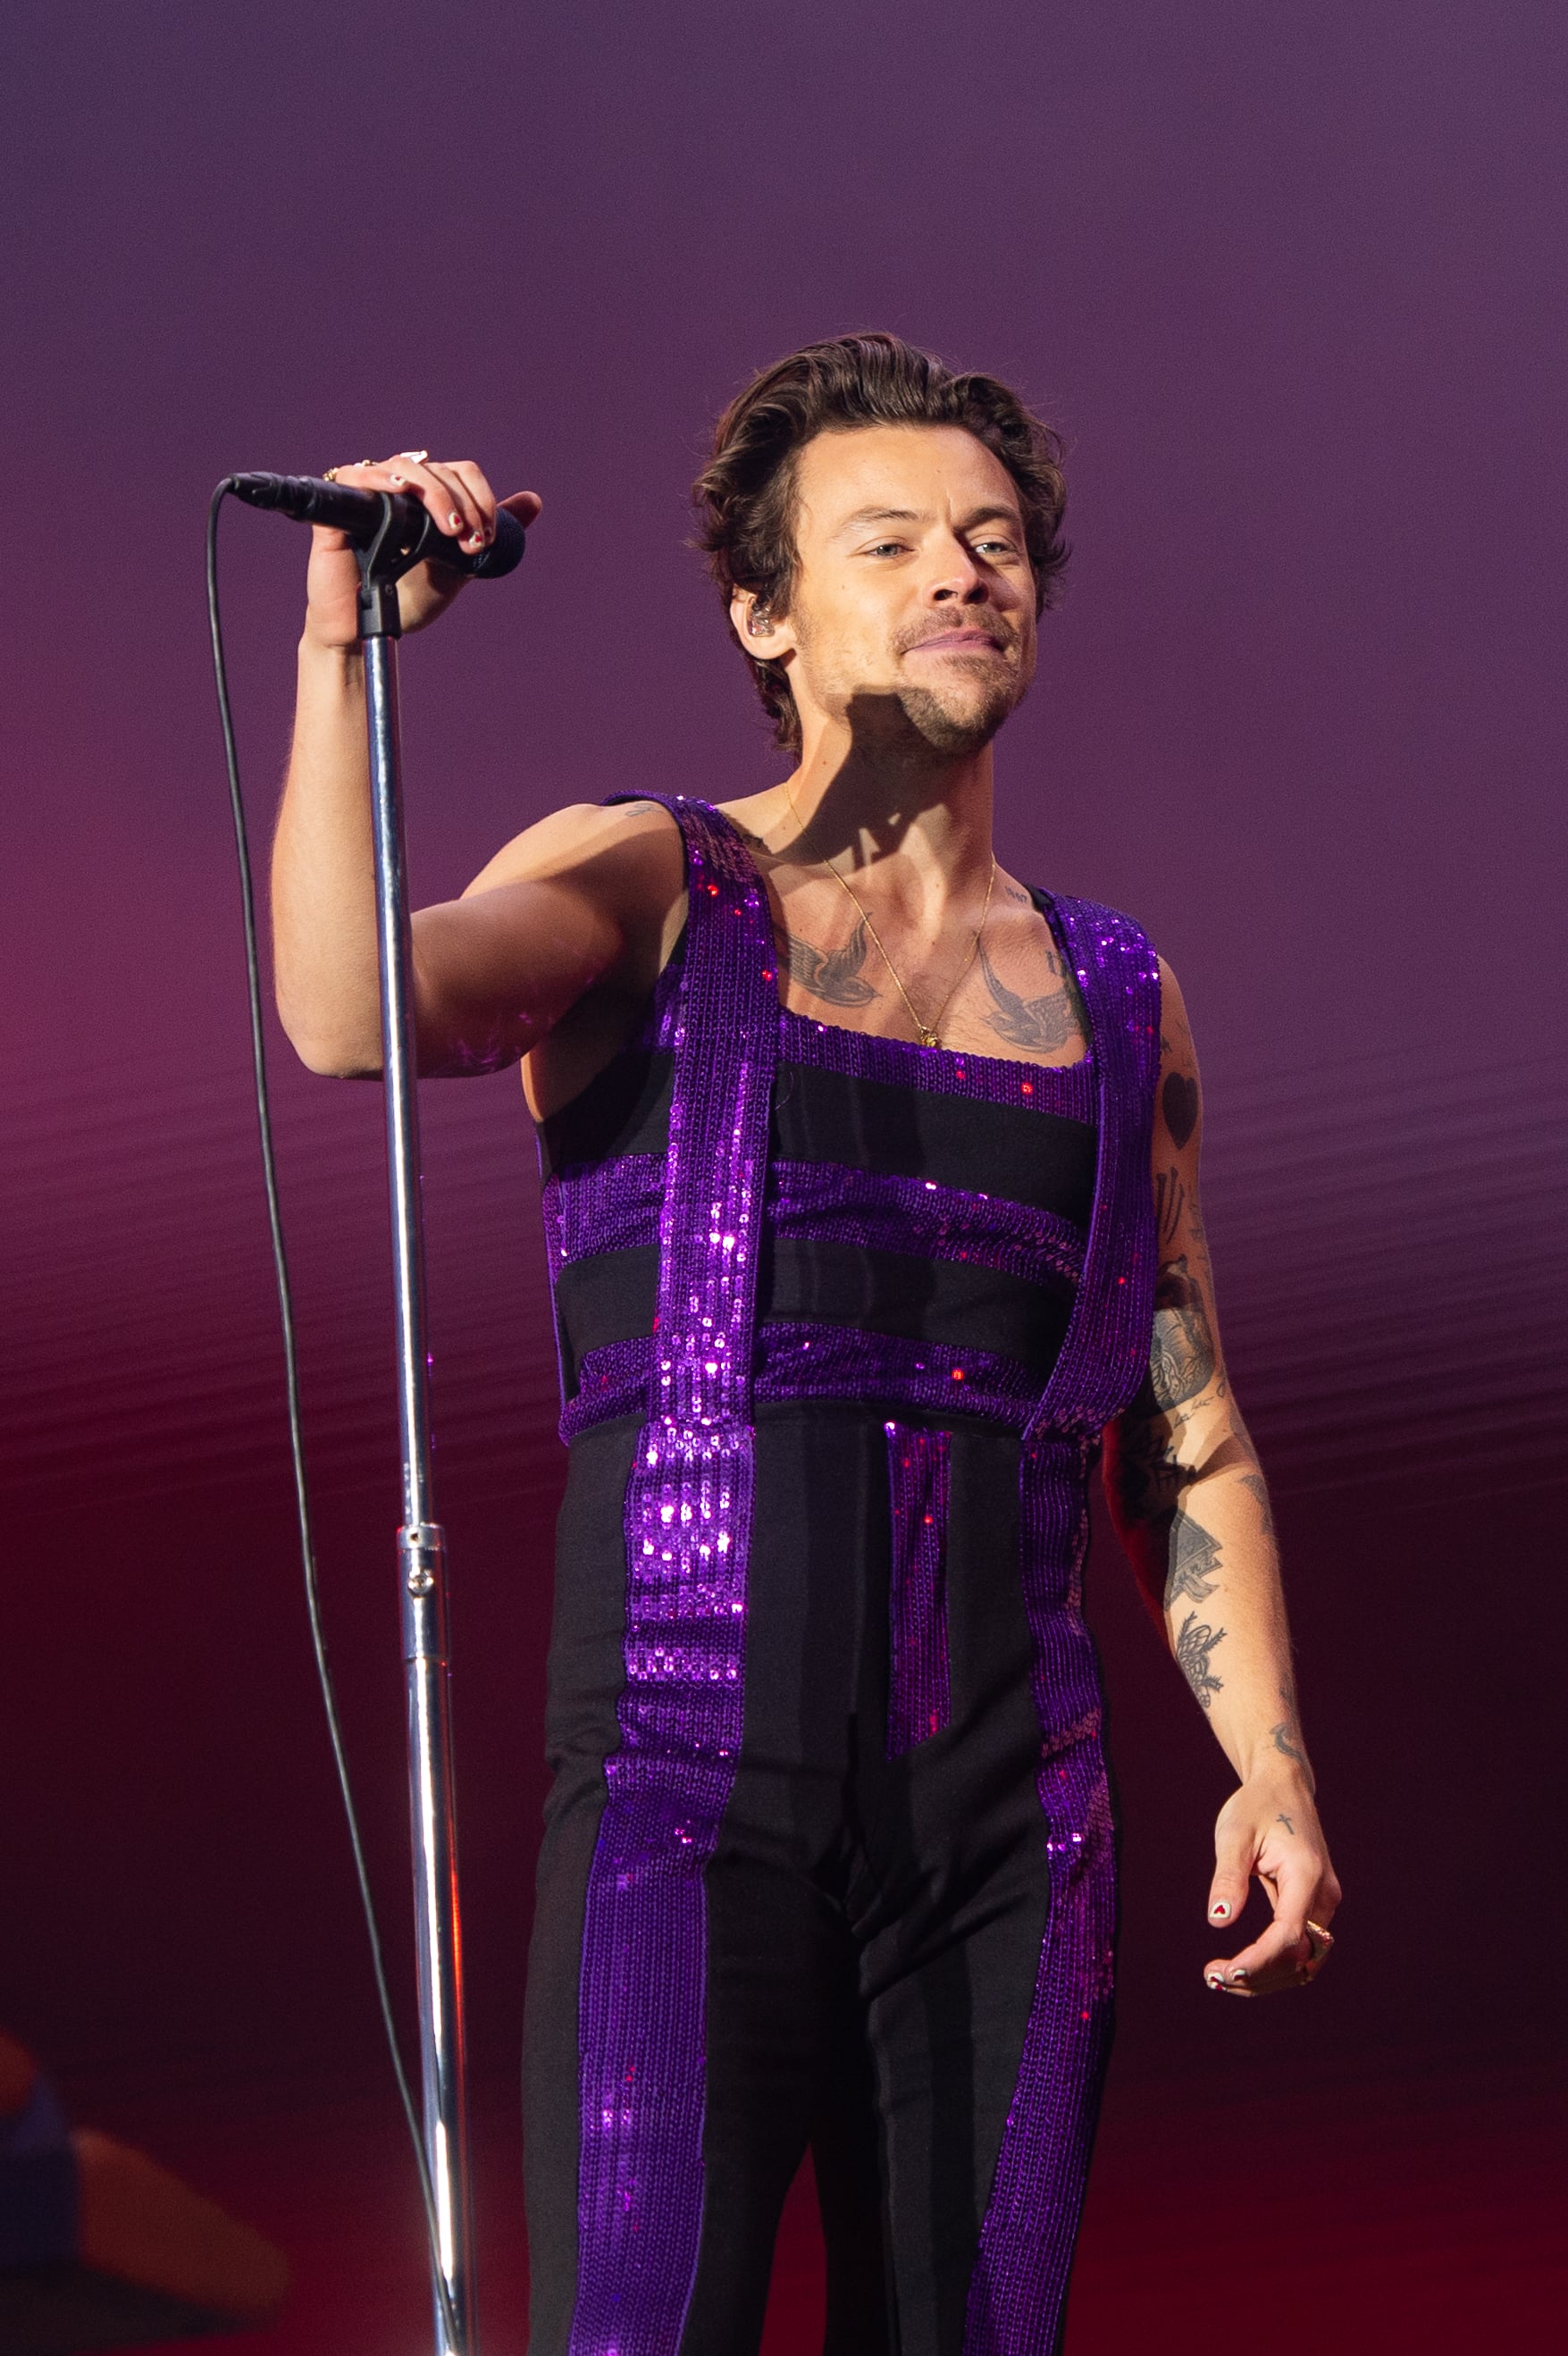 If you want to be ripped like Harry Styles, take up Pilates